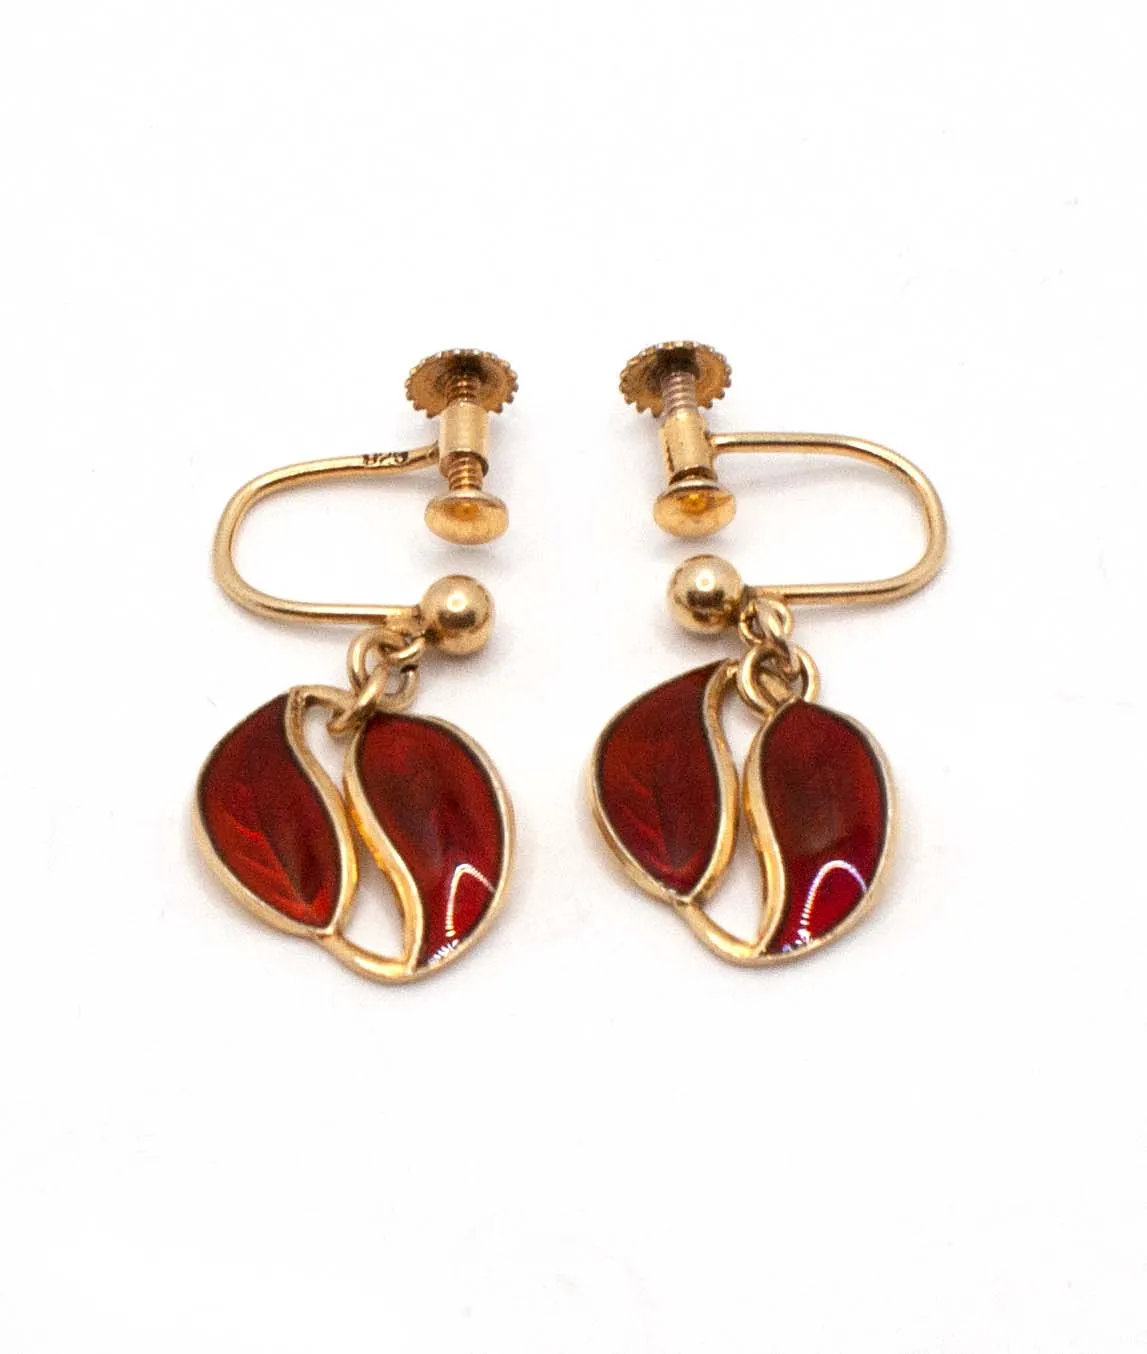 Red enamel dangle leaf earrings on gilded silver with screw back fittings by Willy Wineas for David Andersen